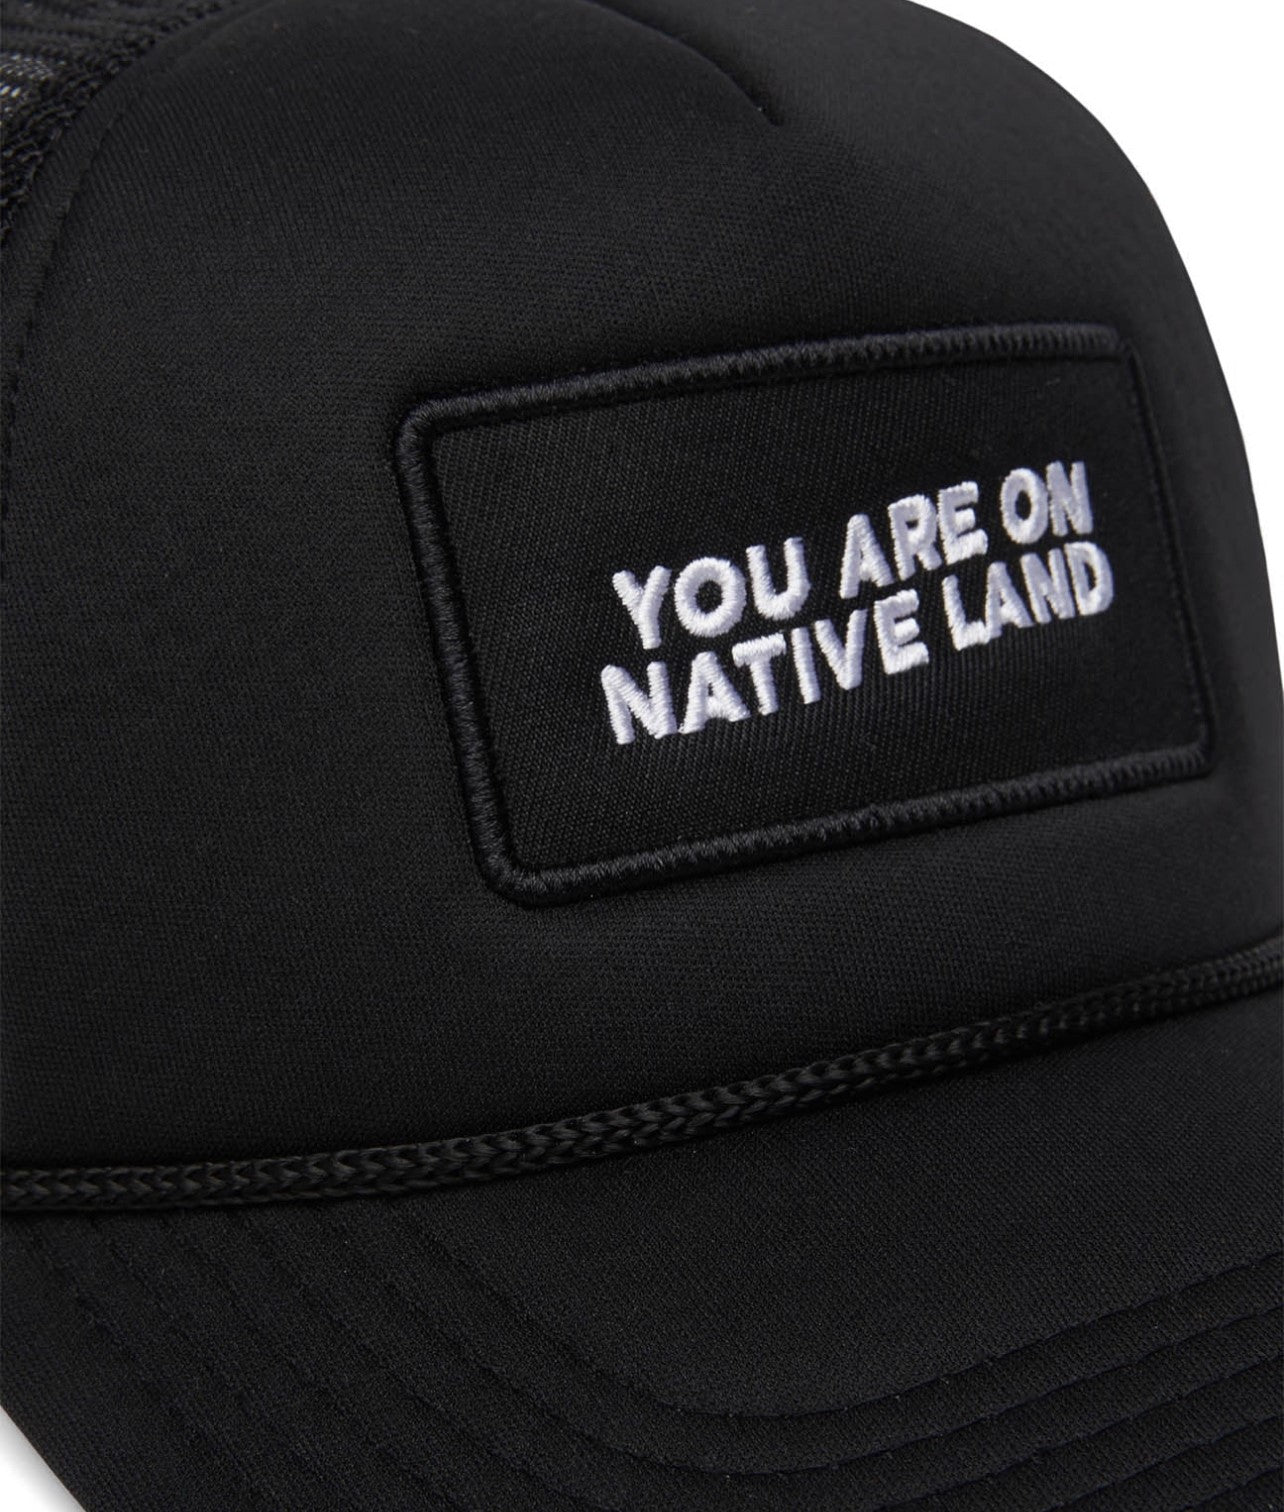 'YOU ARE ON NATIVE LAND' TRUCKER HAT